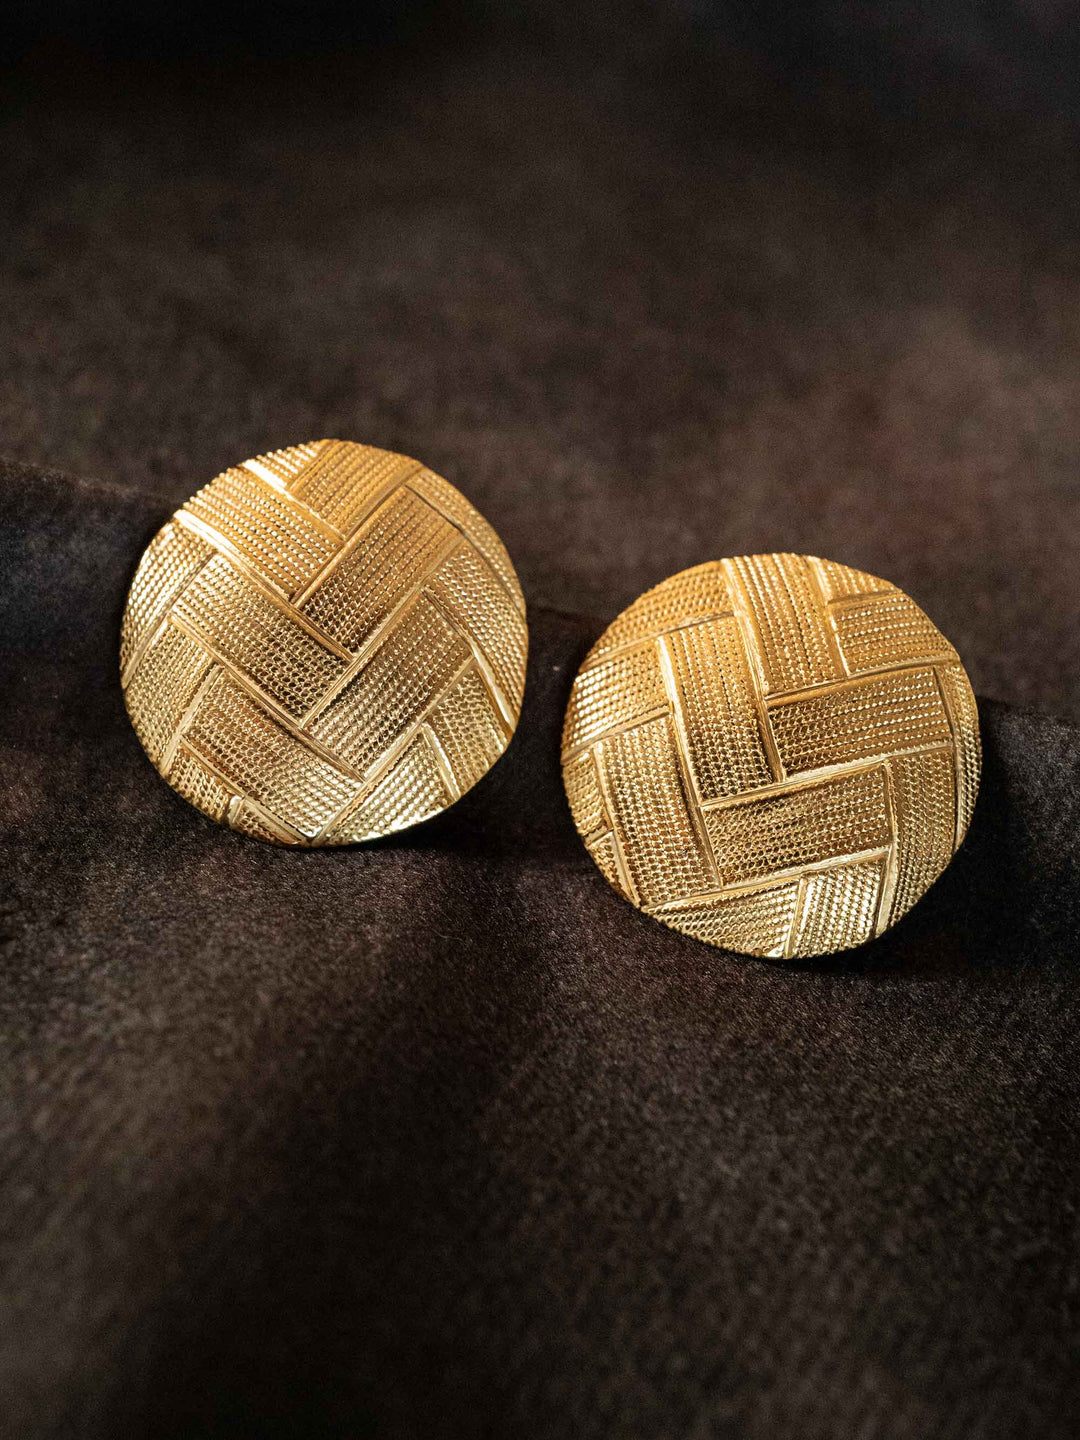 A pair of round gold earrings